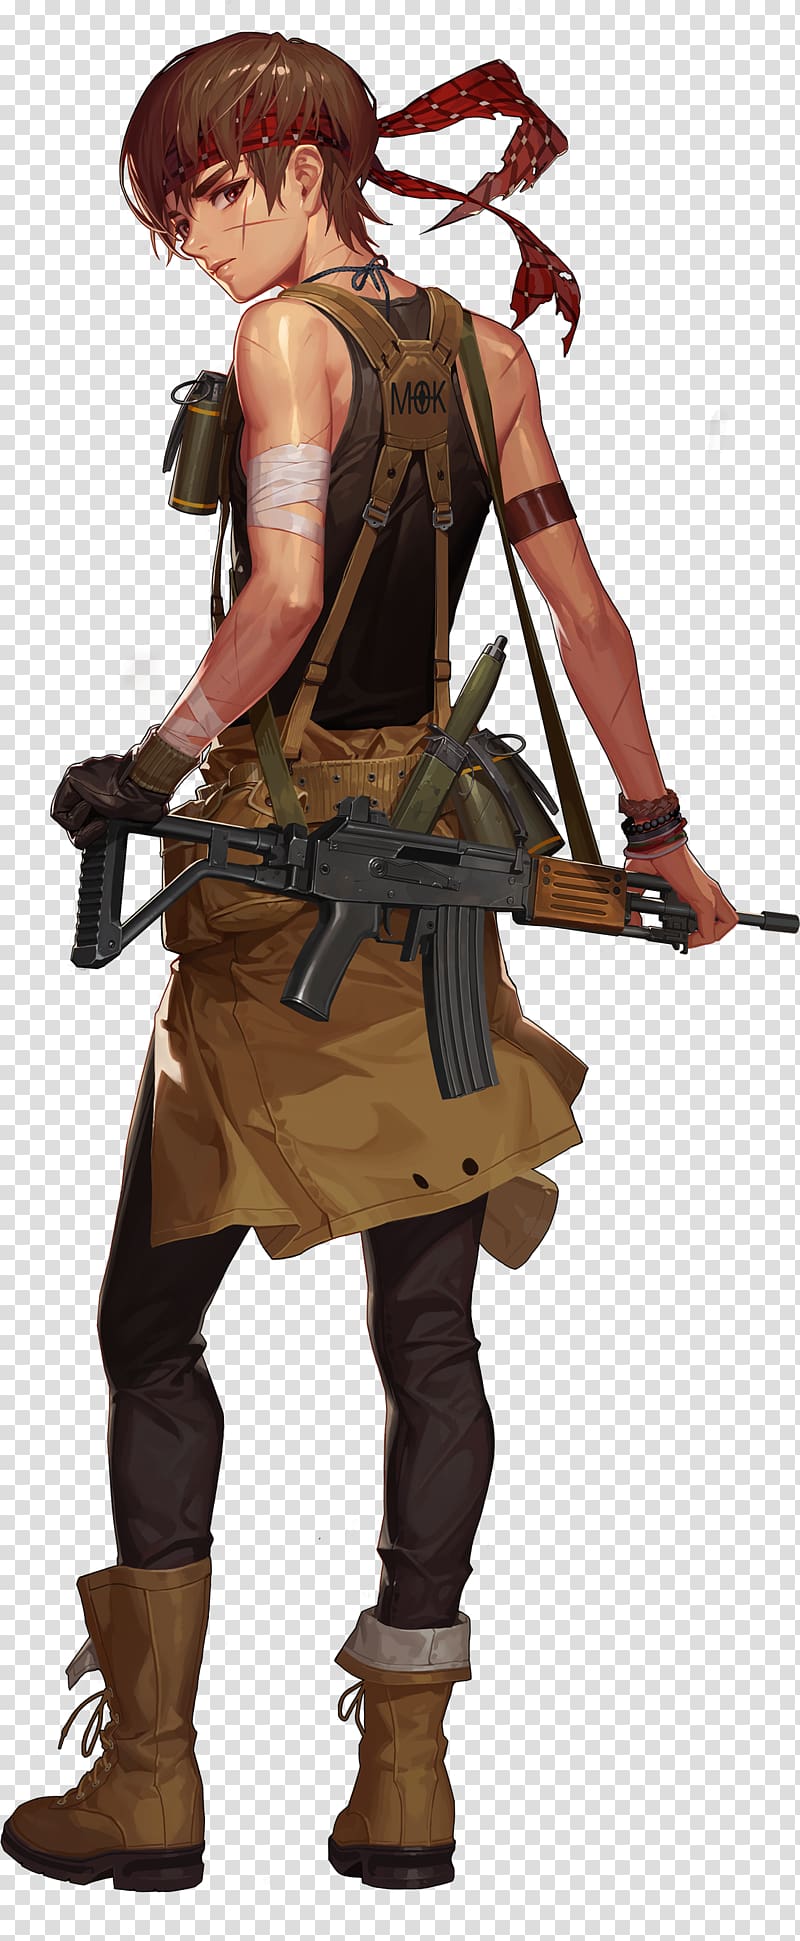 Black Survival Character Concept art Drawing, Rules Of Survival transparent background PNG clipart